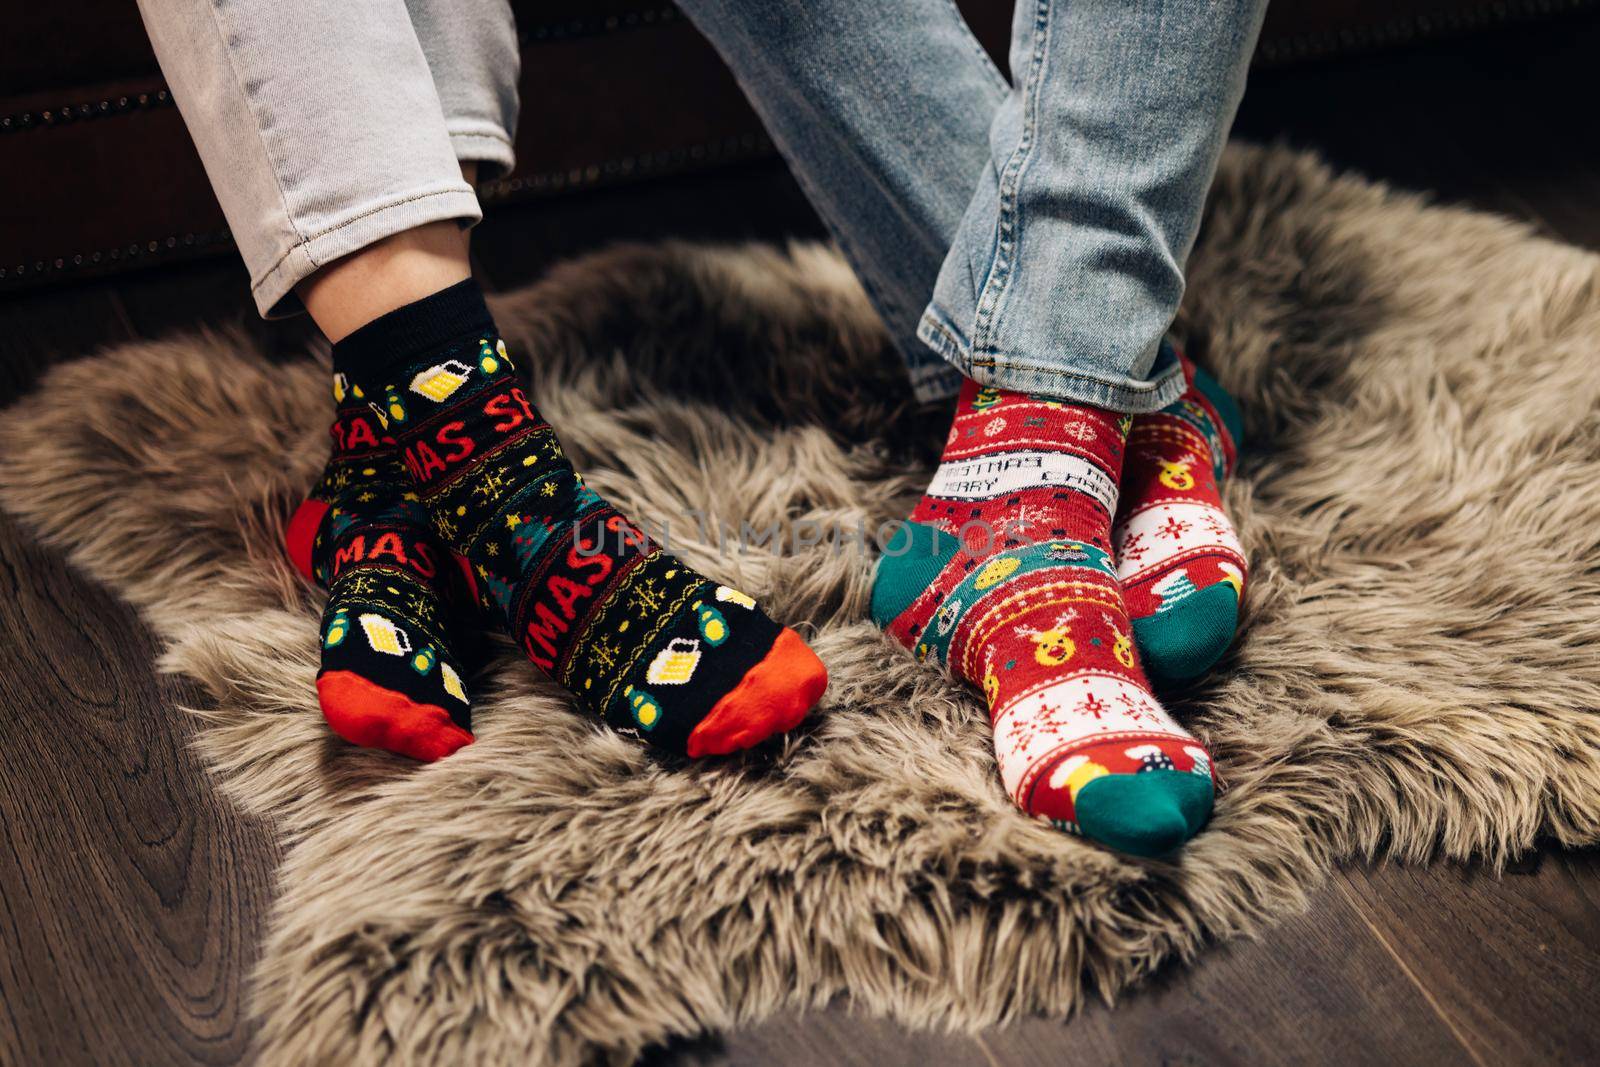 Feet in colorful wool socks. Legs in winter christmas socks in cozy home interior. Christmas socks. Two pairs of foot, dressed in Xmas soks. Atmosphere of Christmas. The idea for happy family